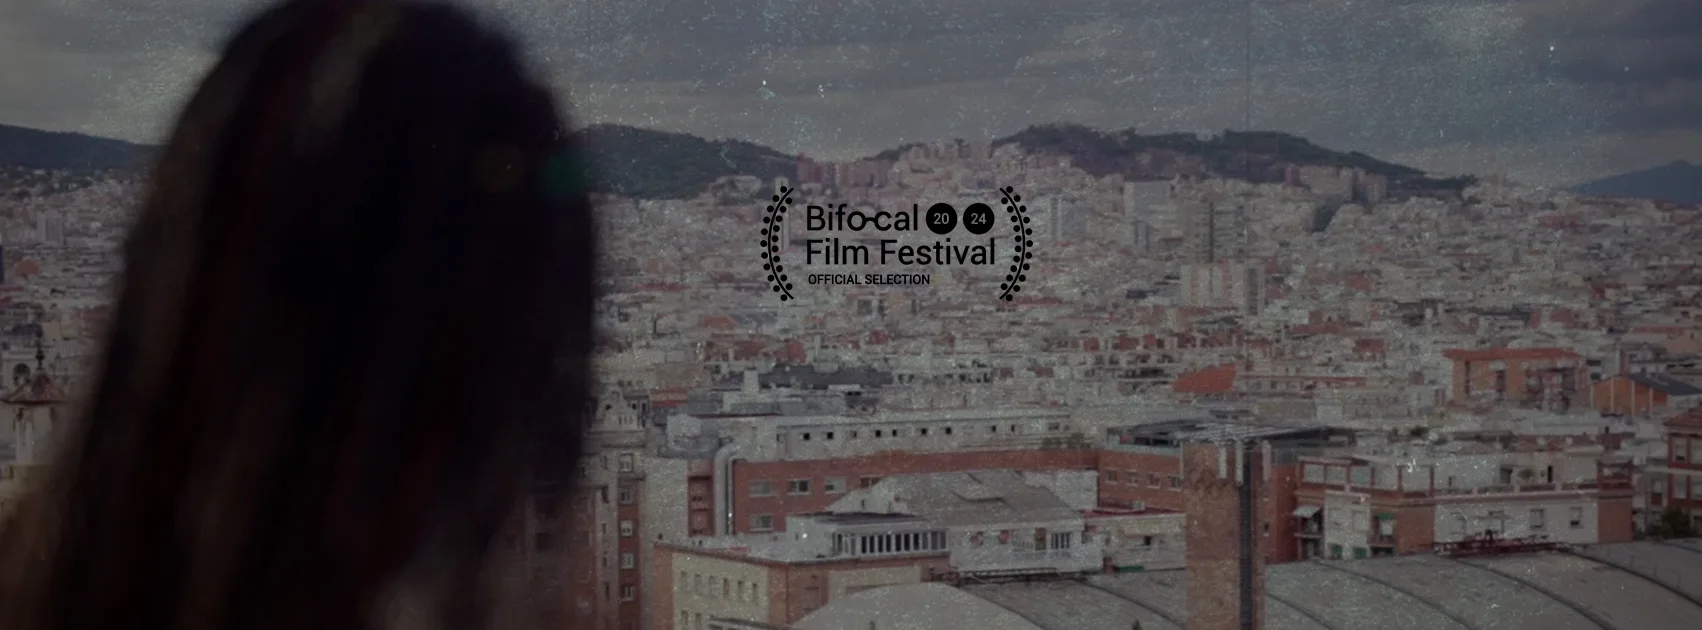 The short documentary "As leaves in the wind" by Sofia Luz is is in the official selection of Bifocal Film Festival